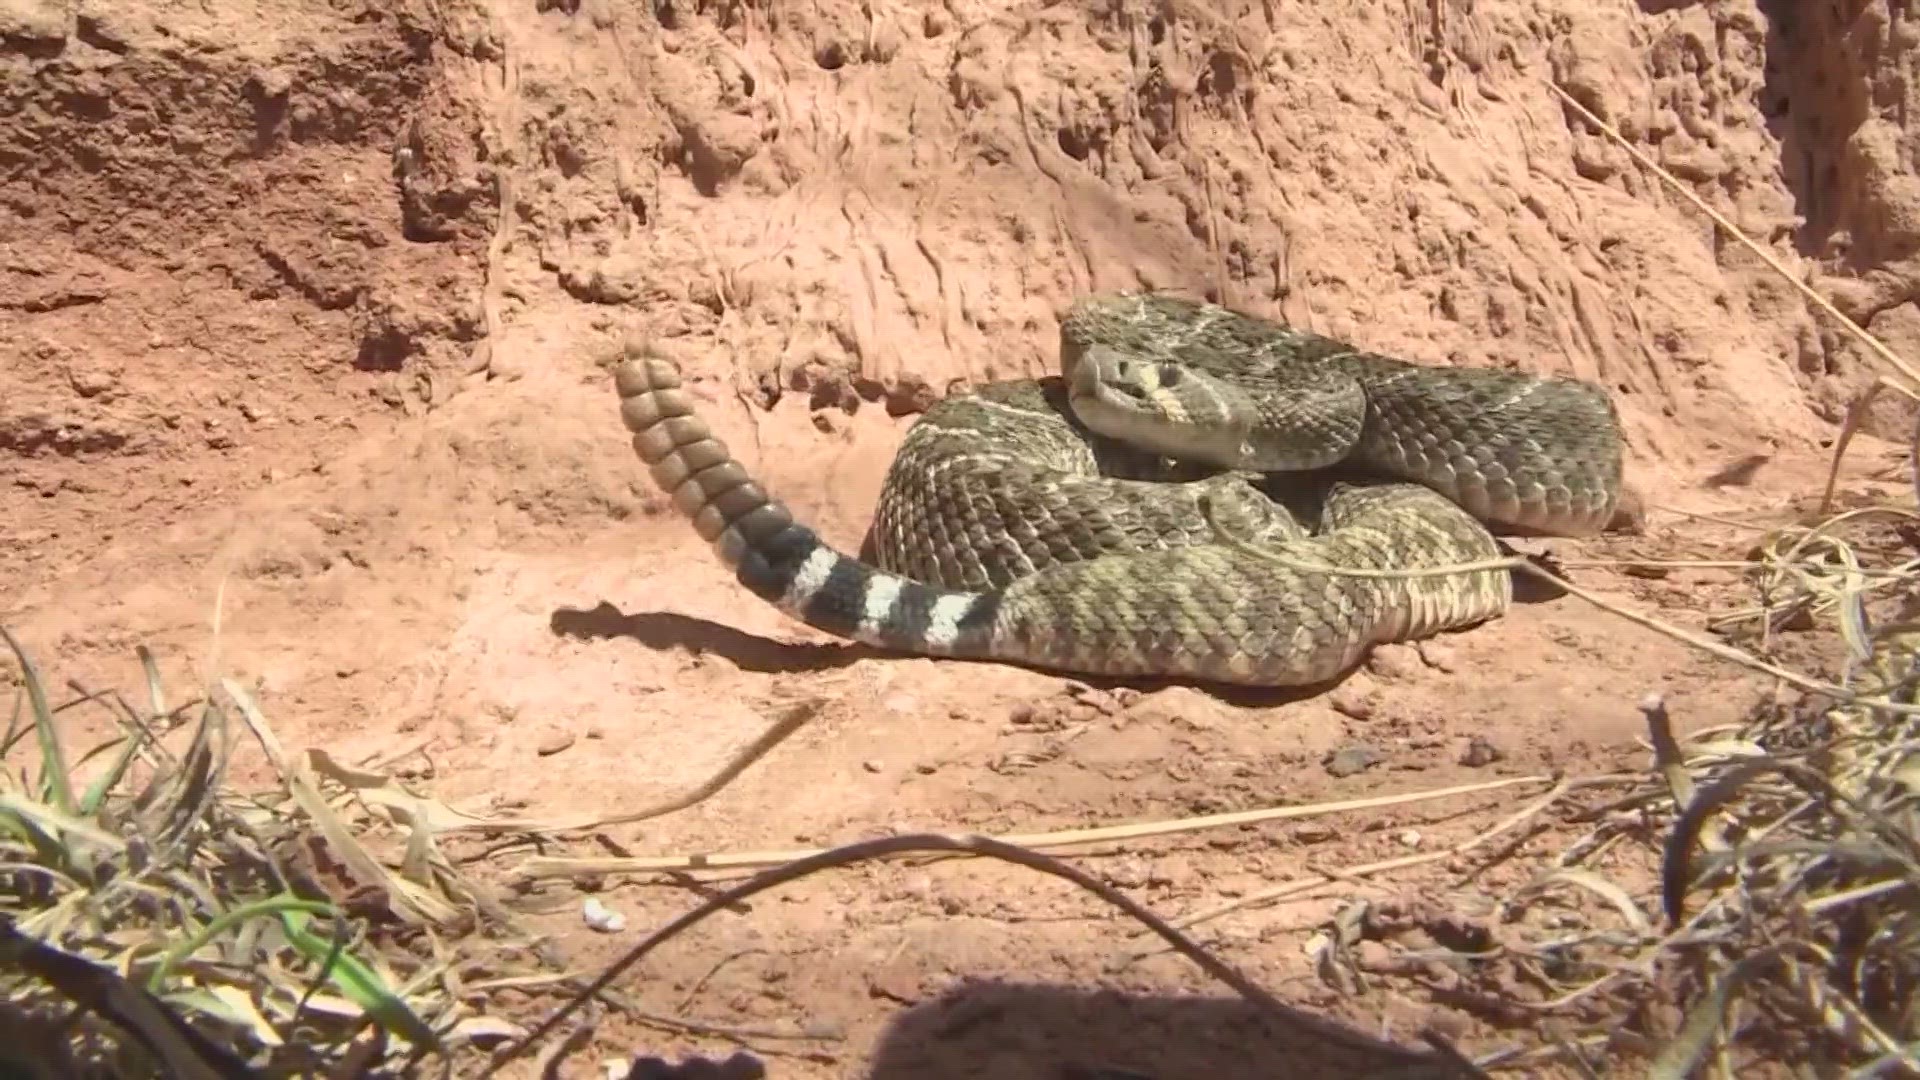 Rattlesnake season is right around the corner as summer approaches.